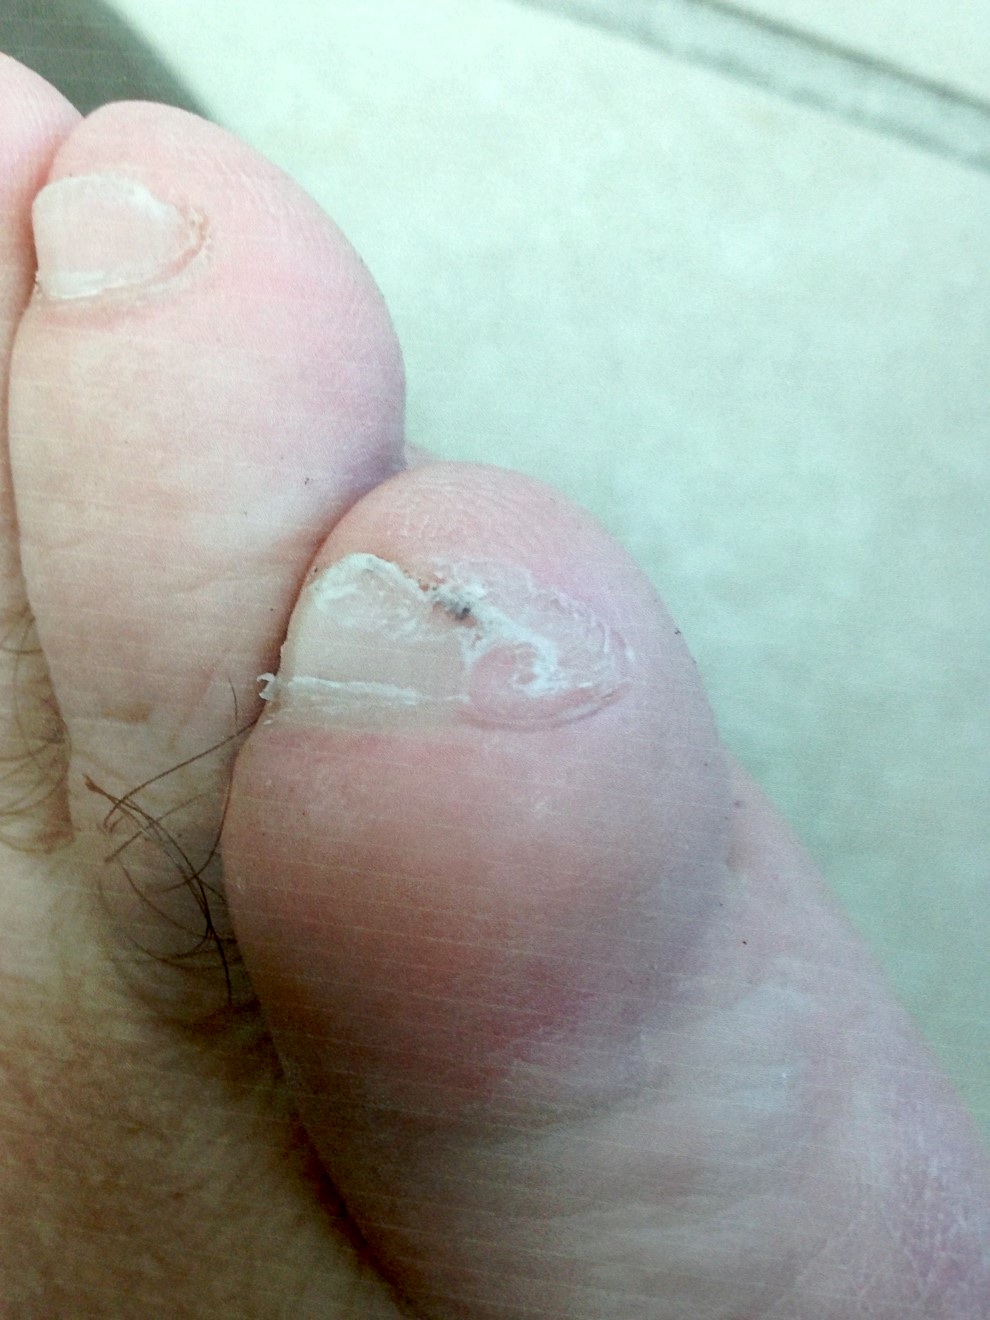 Swelling over the toe